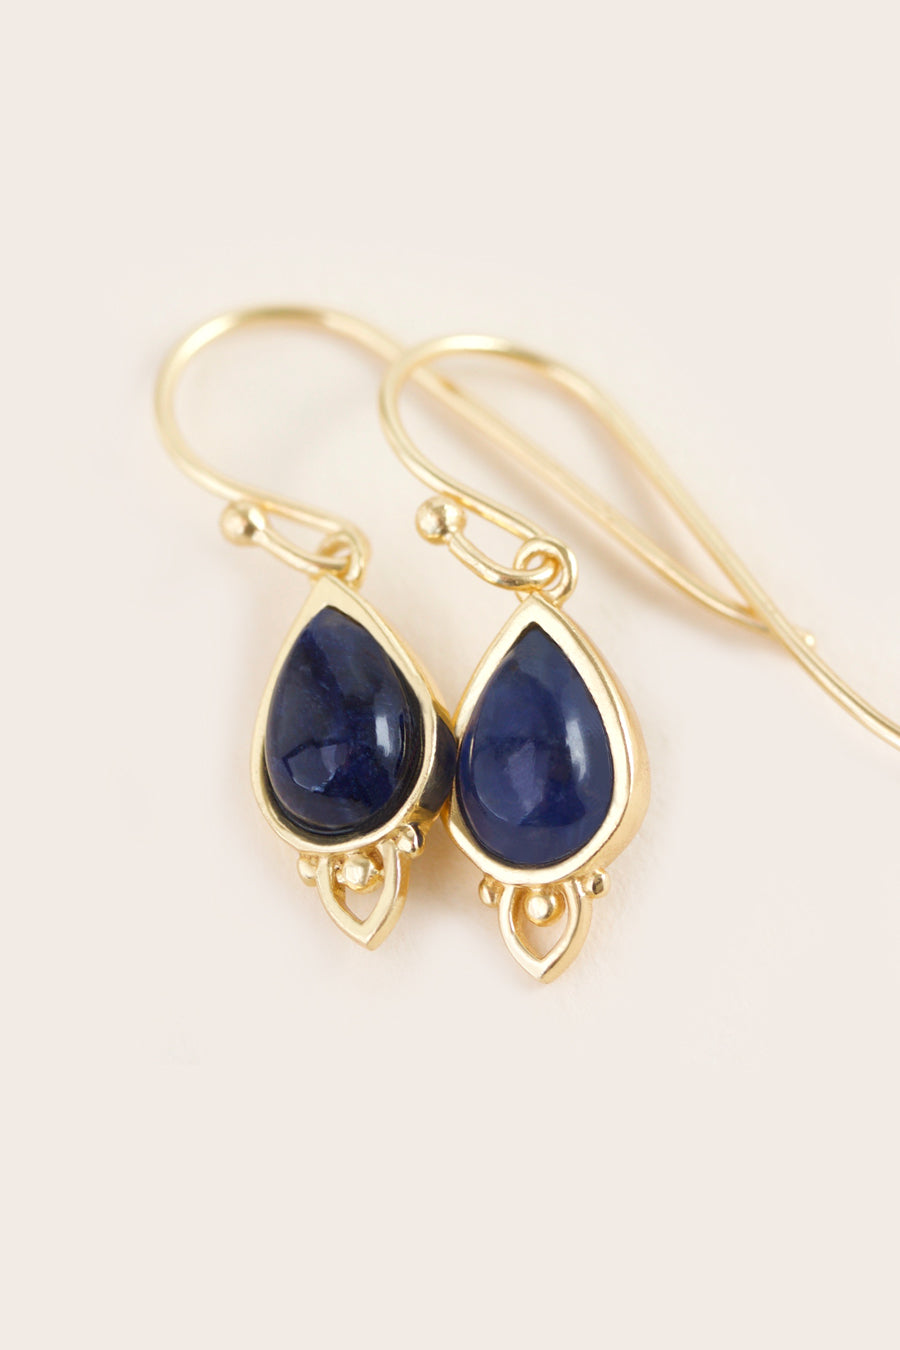 Third Eye Intuitive Intuition Earrings for Clarity NZ Jewellery